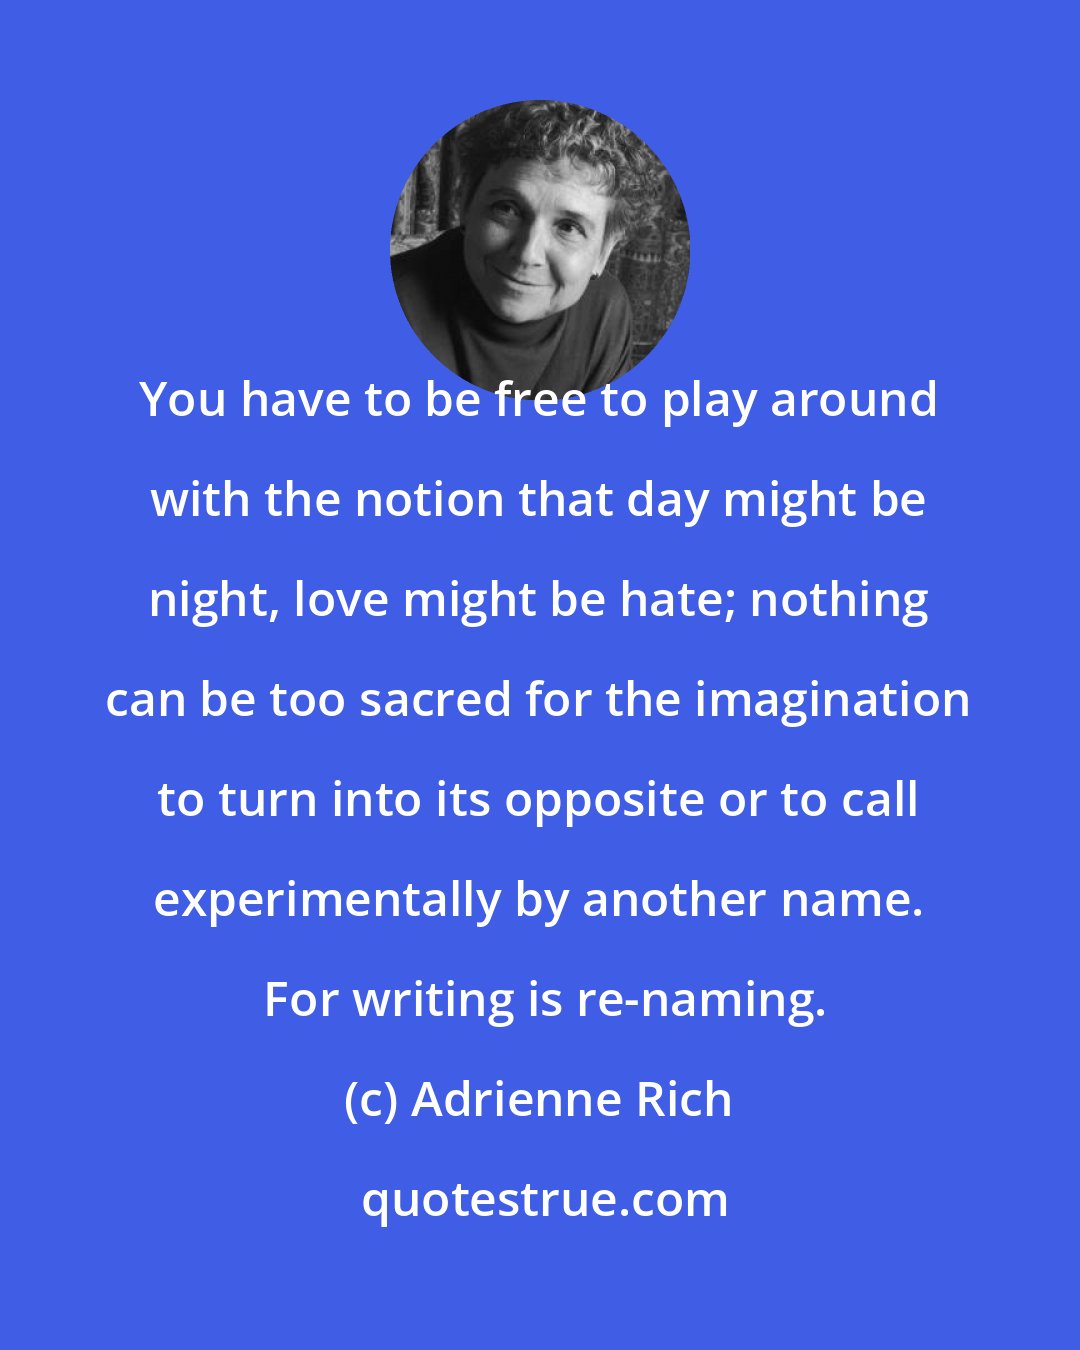 Adrienne Rich: You have to be free to play around with the notion that day might be night, love might be hate; nothing can be too sacred for the imagination to turn into its opposite or to call experimentally by another name.  For writing is re-naming.